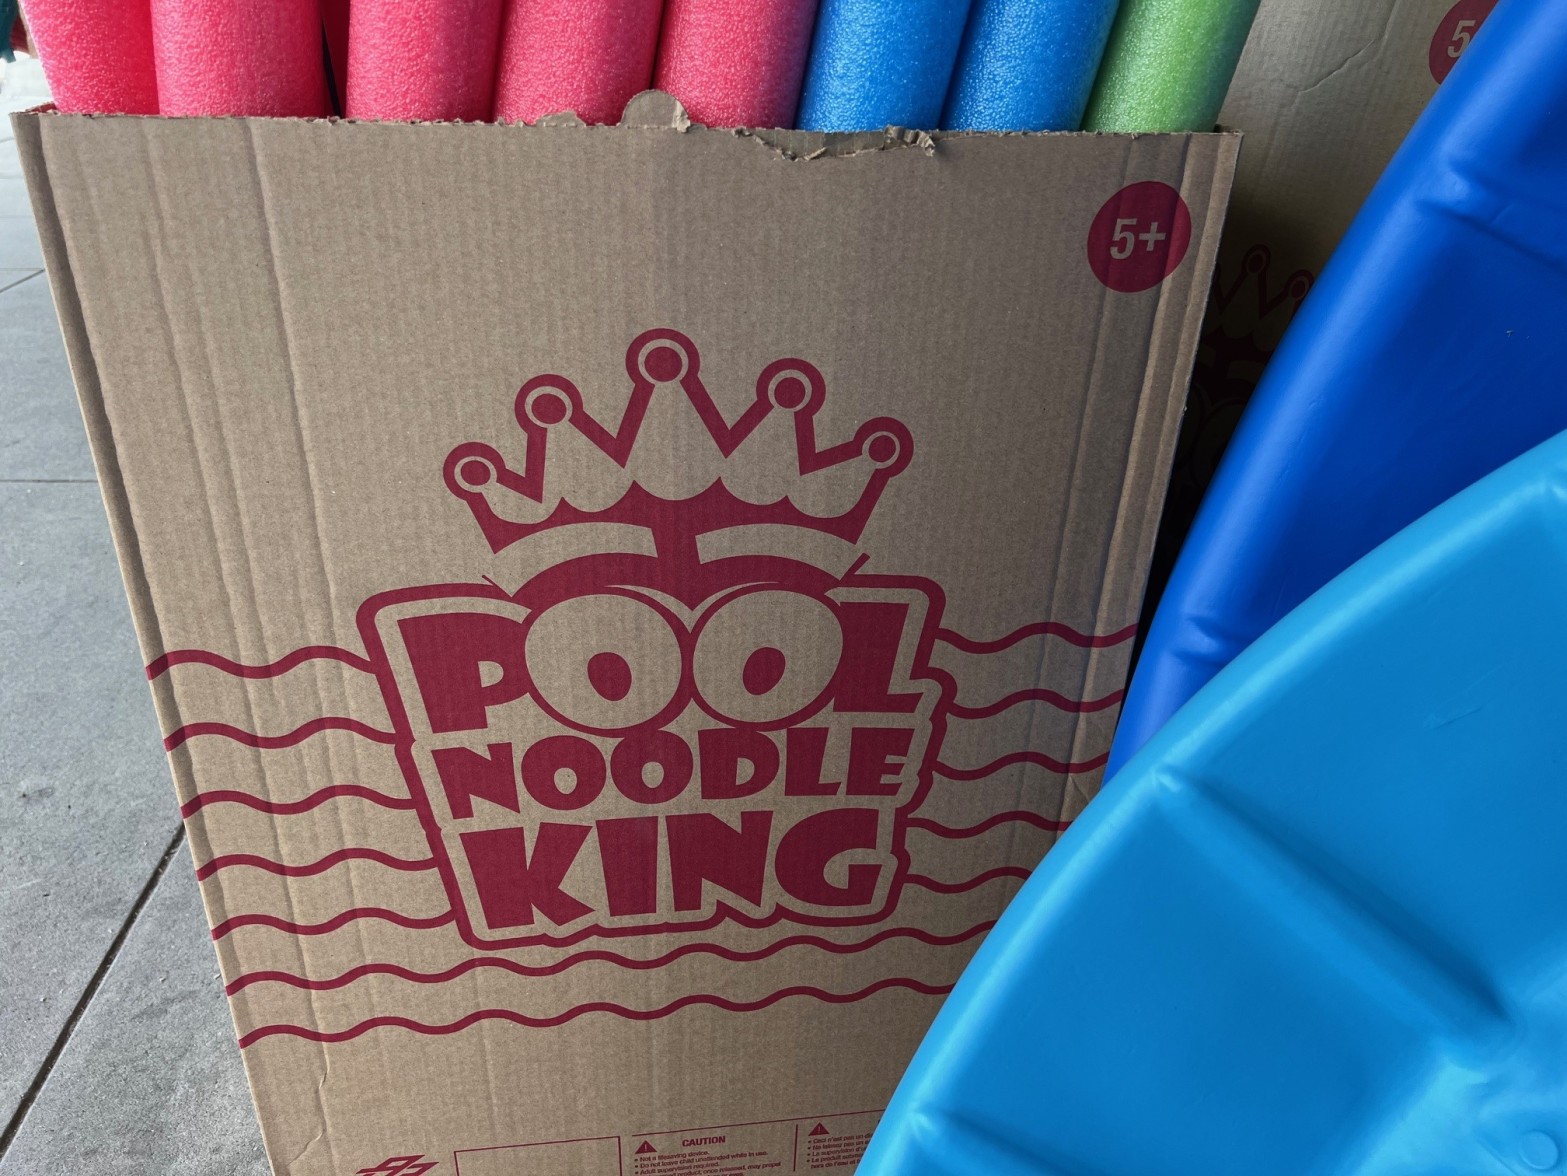 Box of pool noodles. Brand name is Pool Noodle King.